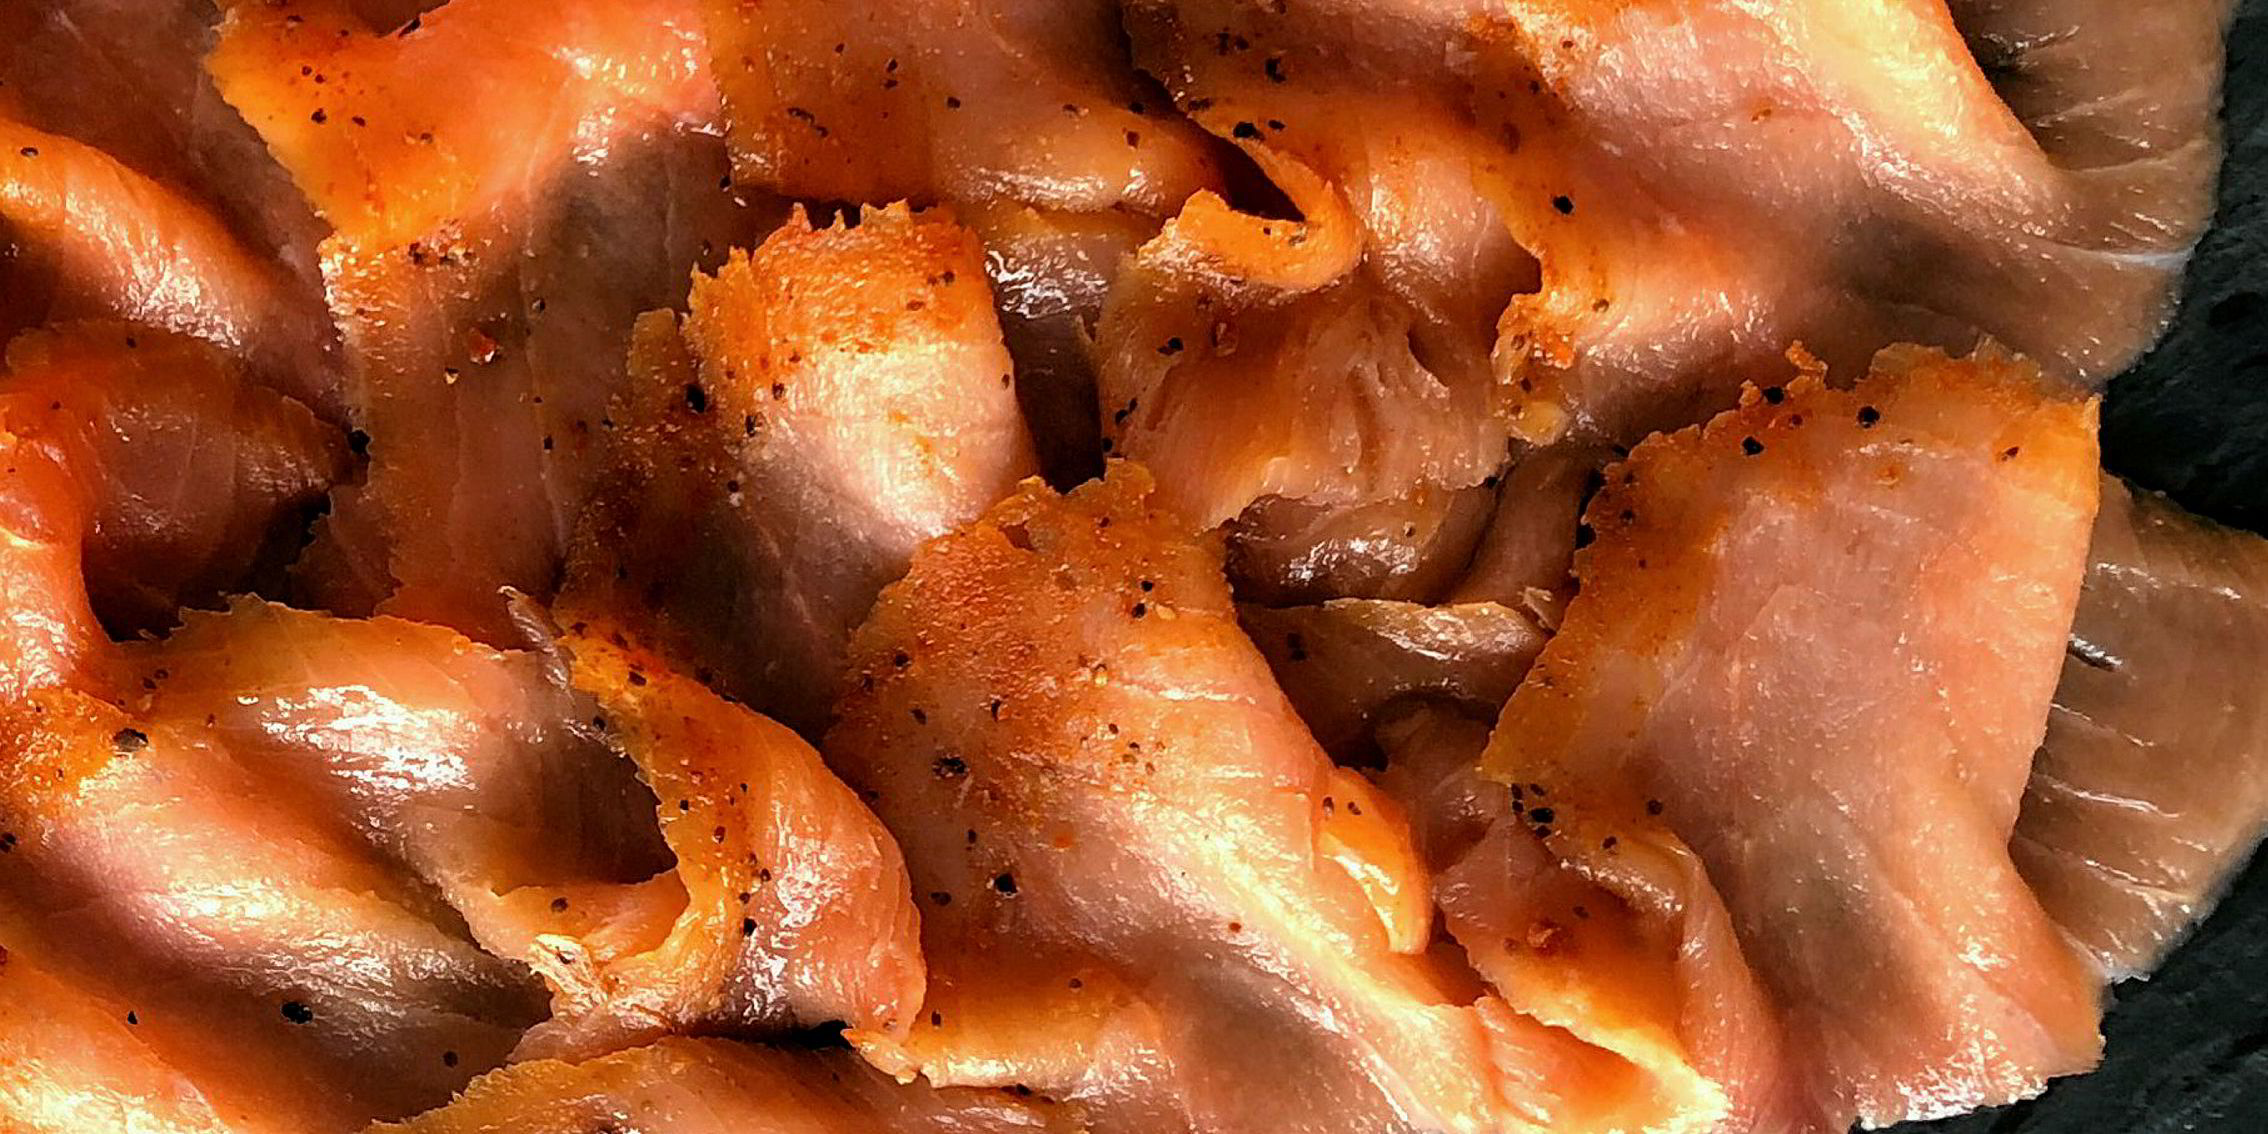 US smoked salmon giant Acme plans massive expansion, new